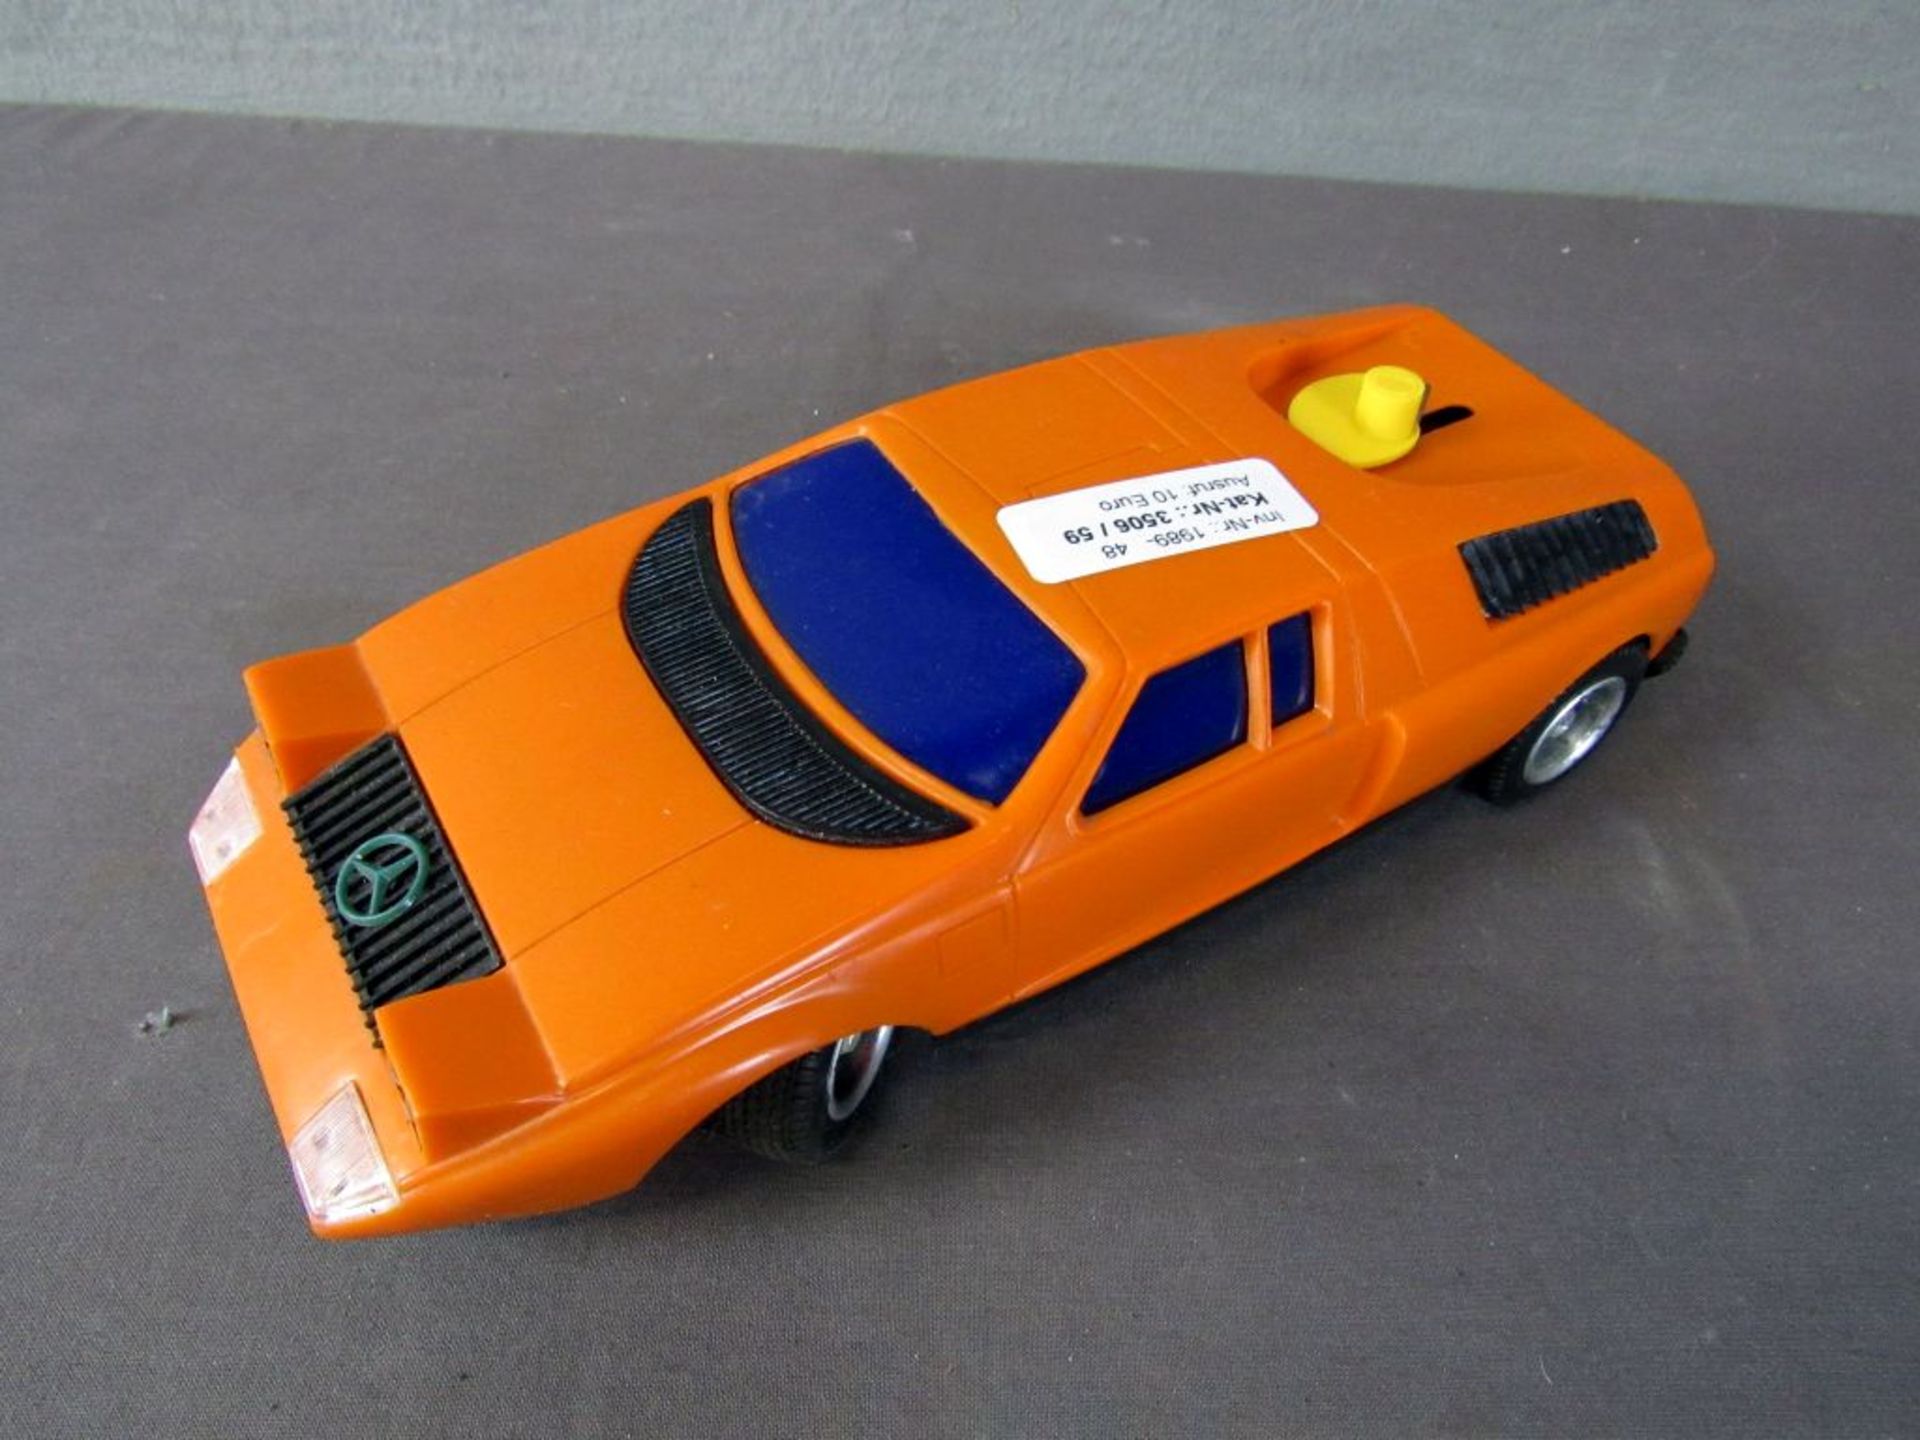 Spielzeugmodell Mercedes 26cm lang - Image 2 of 6